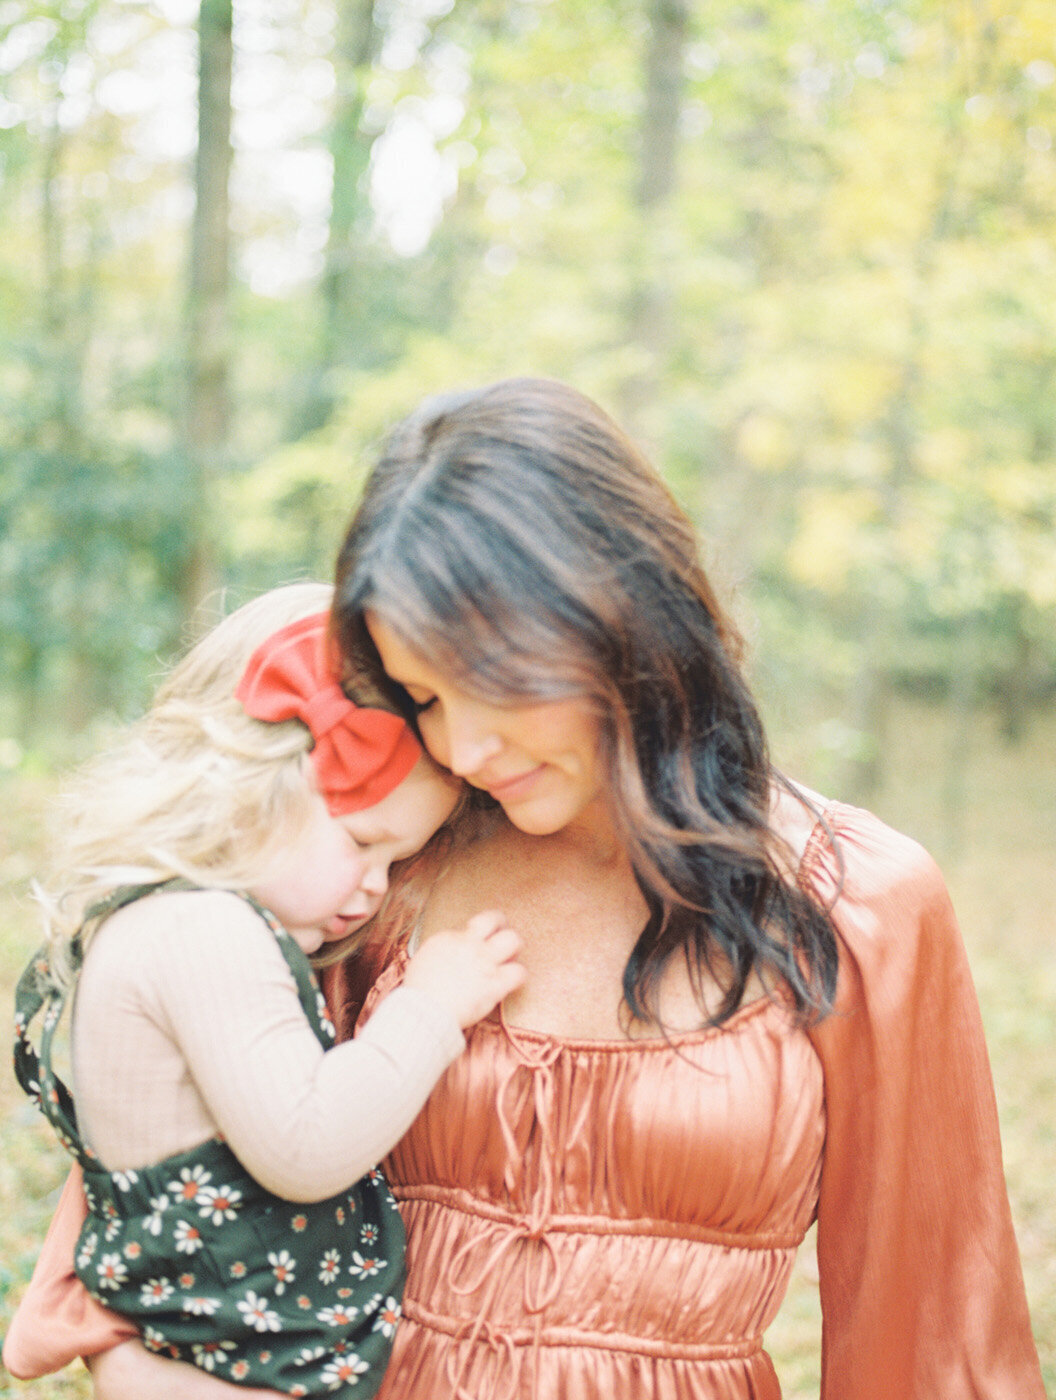 Raleigh Family Photographer | Jessica Agee Photography - 004